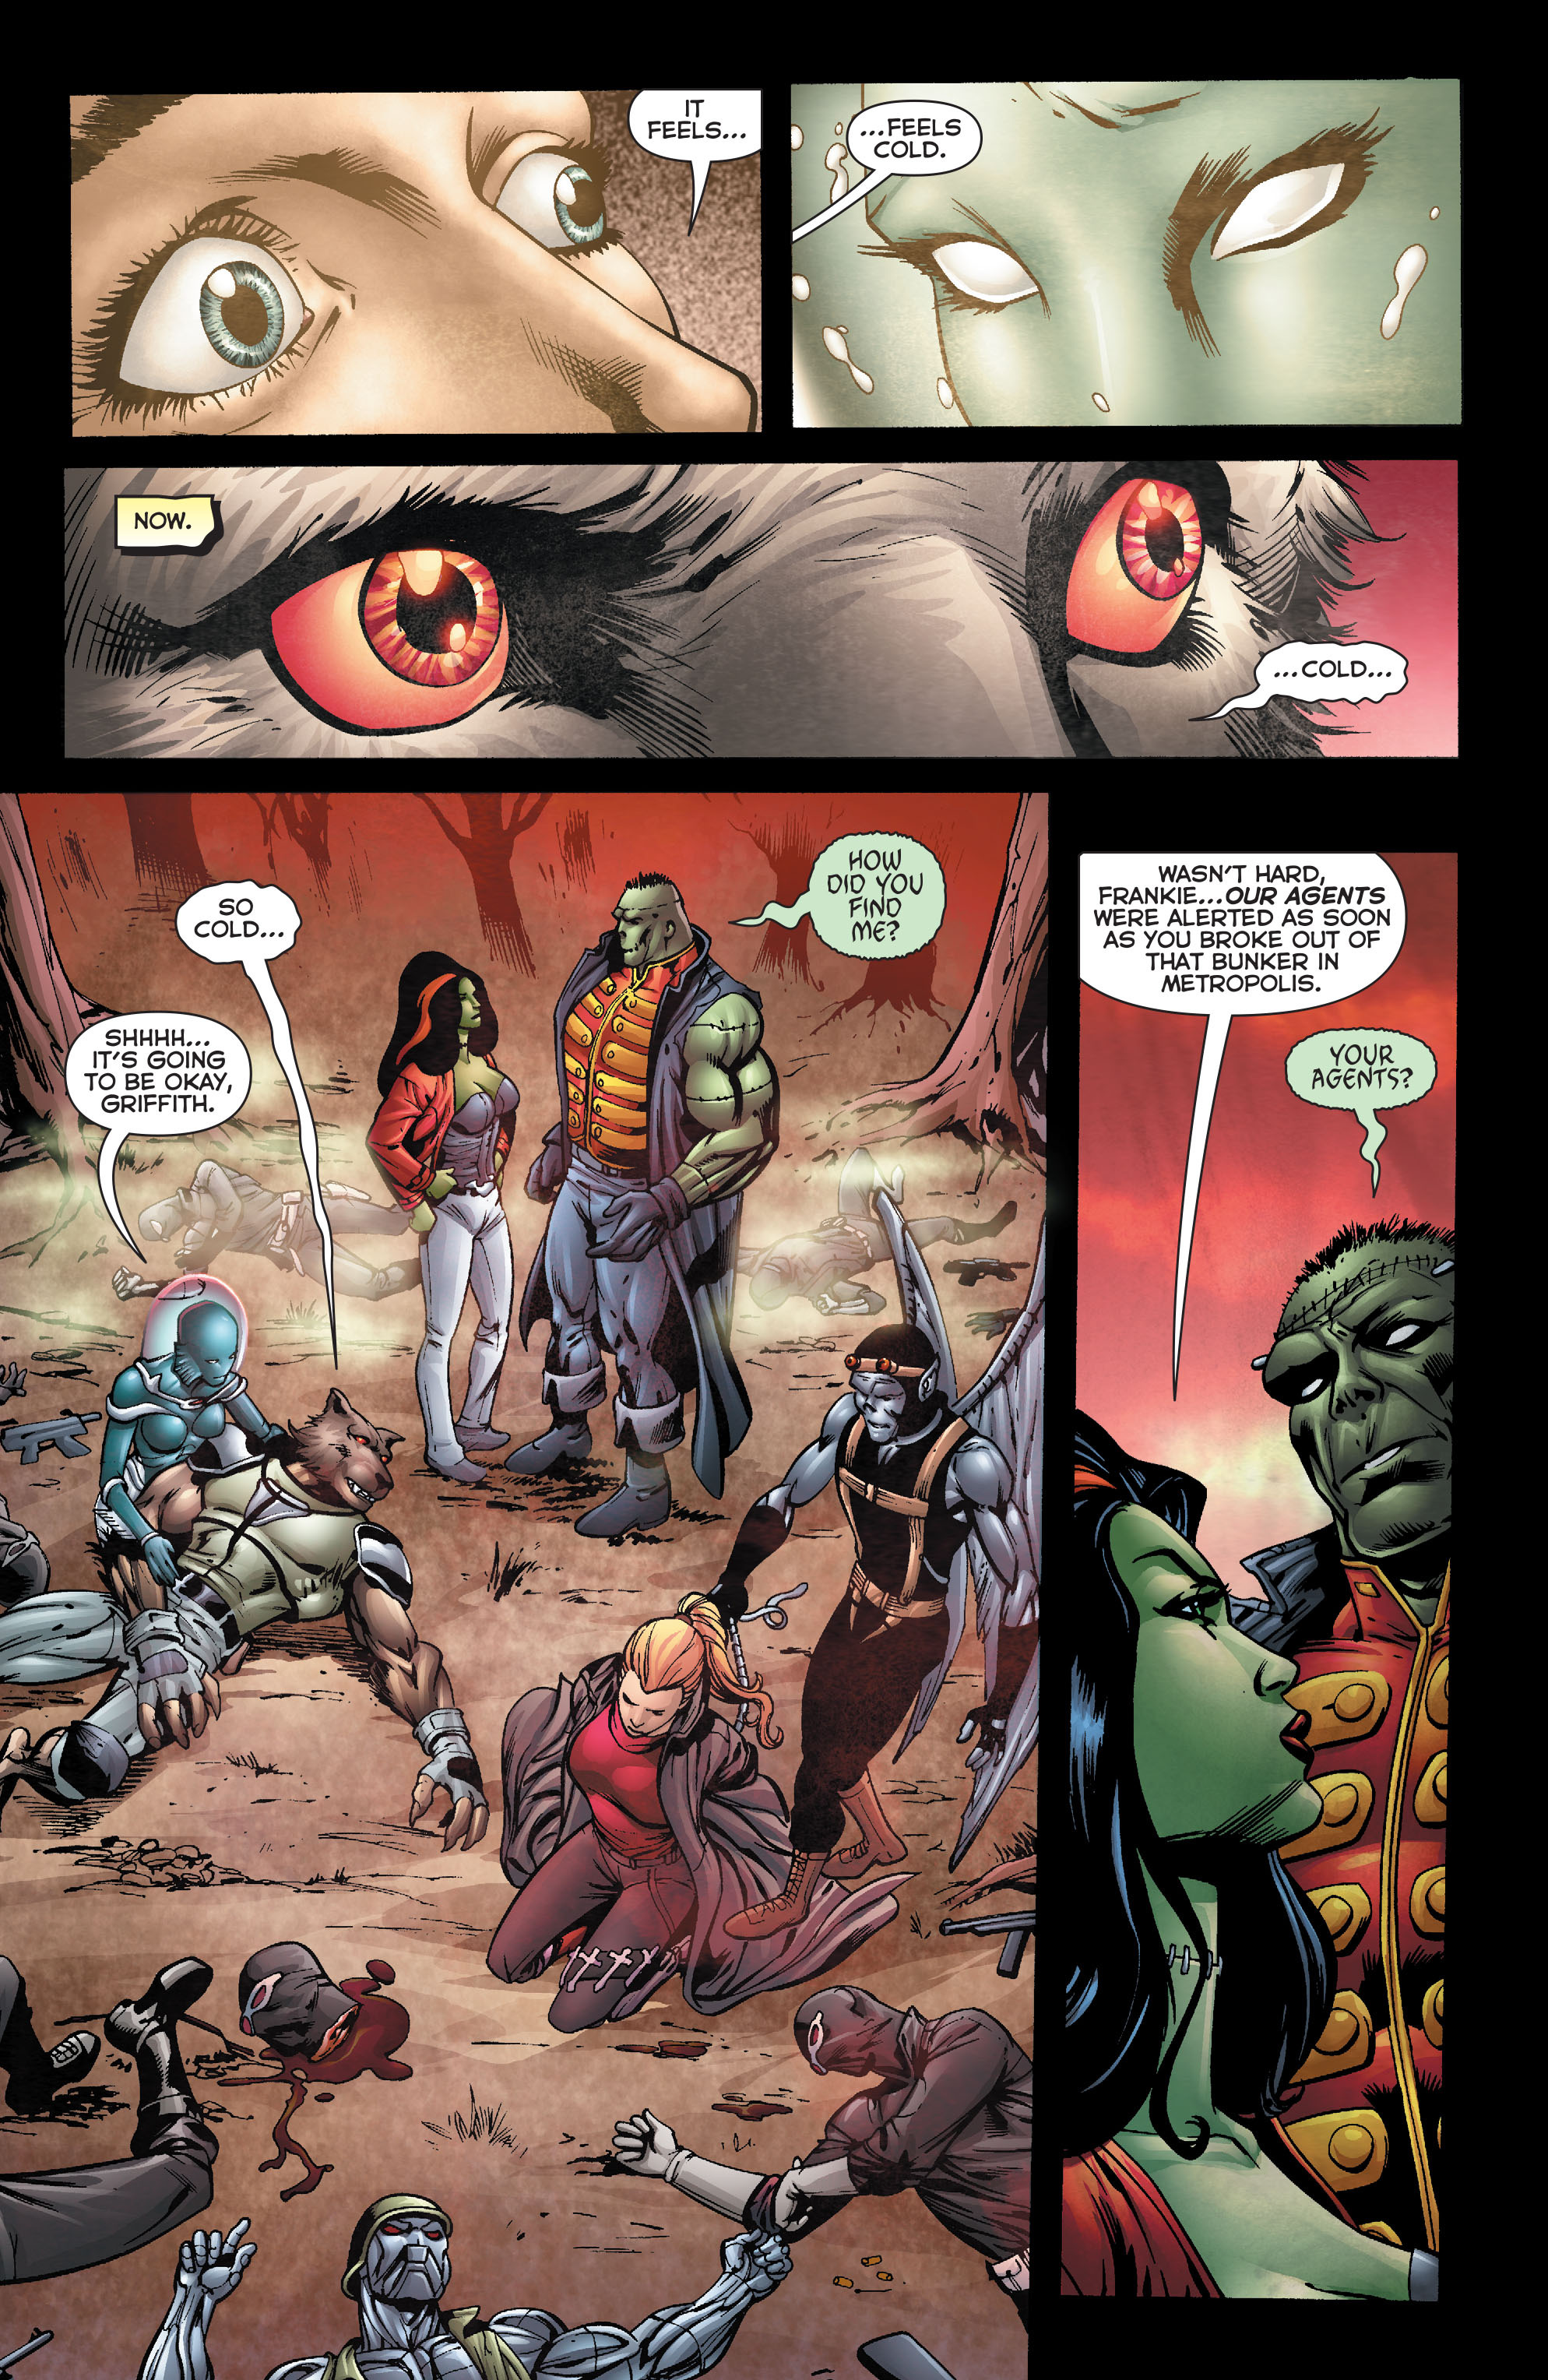 Flashpoint: The World of Flashpoint Featuring Green Lantern Full #1 - English 106